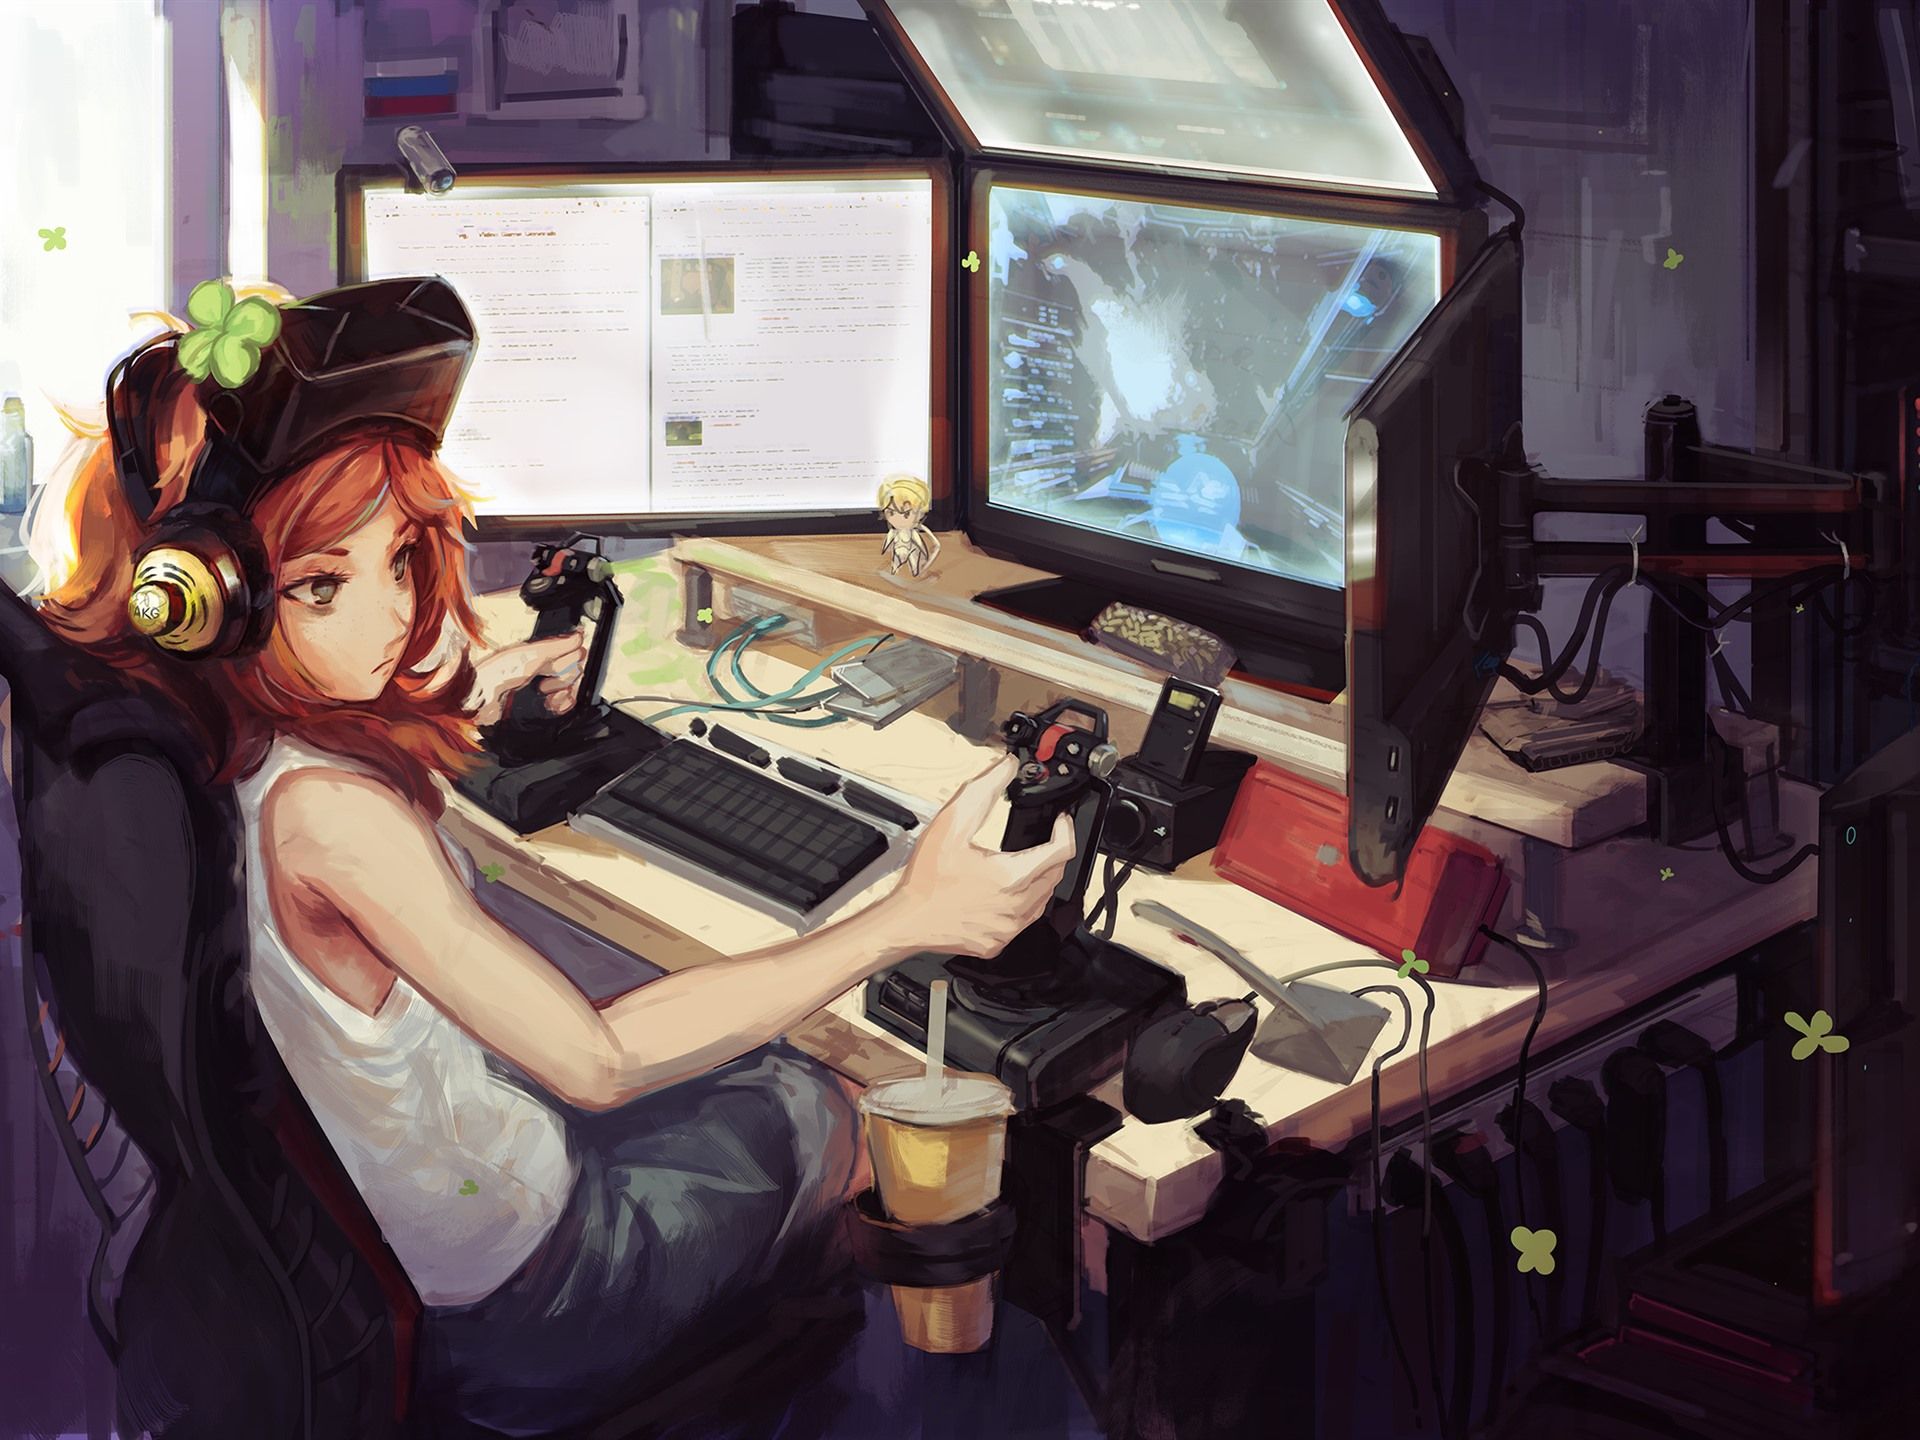 Wallpaper Anime girl play PC games 2560x1600 HD Picture, Image